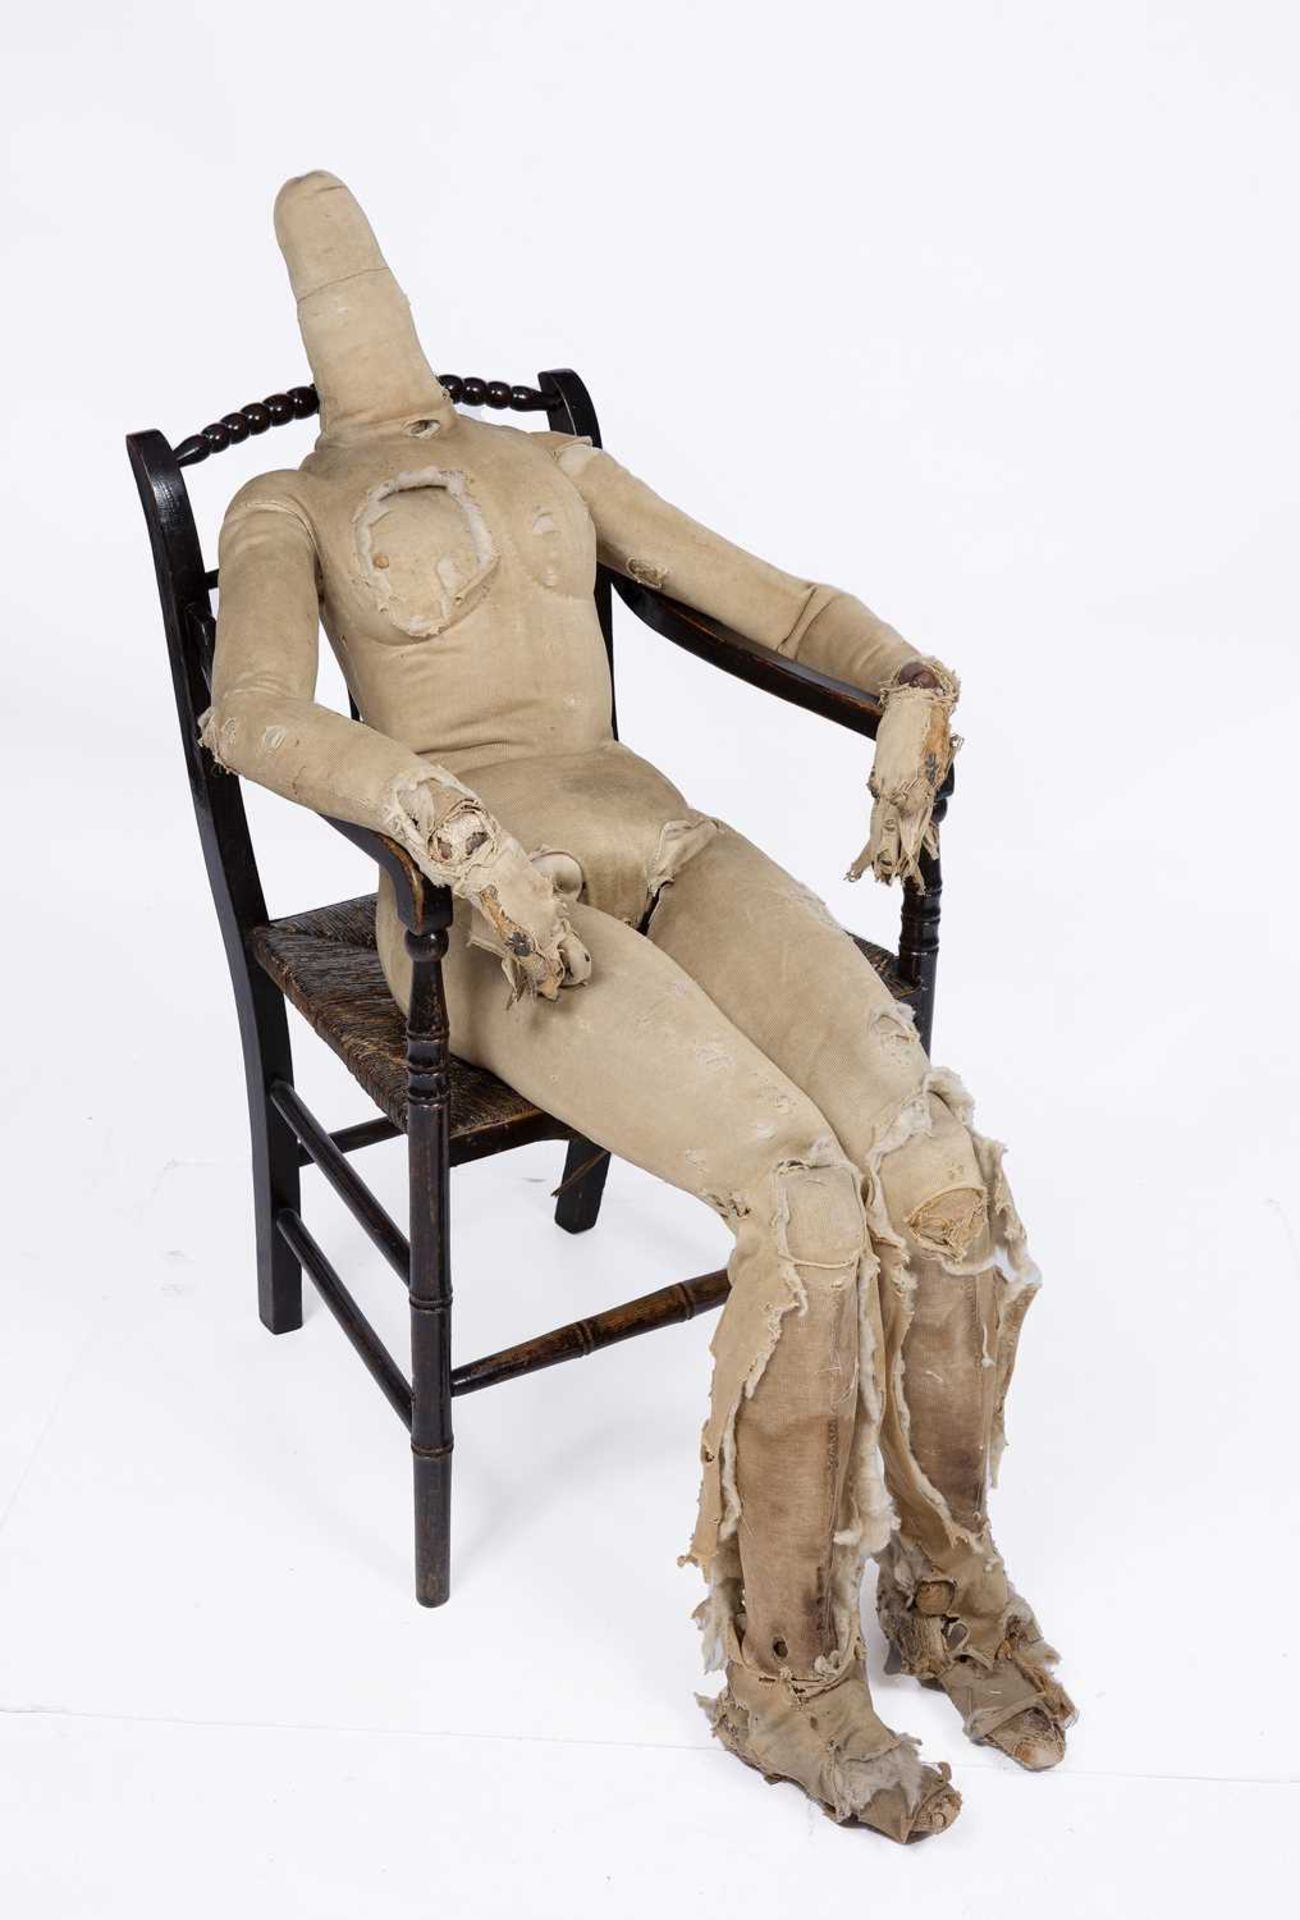 A mid 19th century adult size artists lay figure with articulated brass joints and a wooden frame